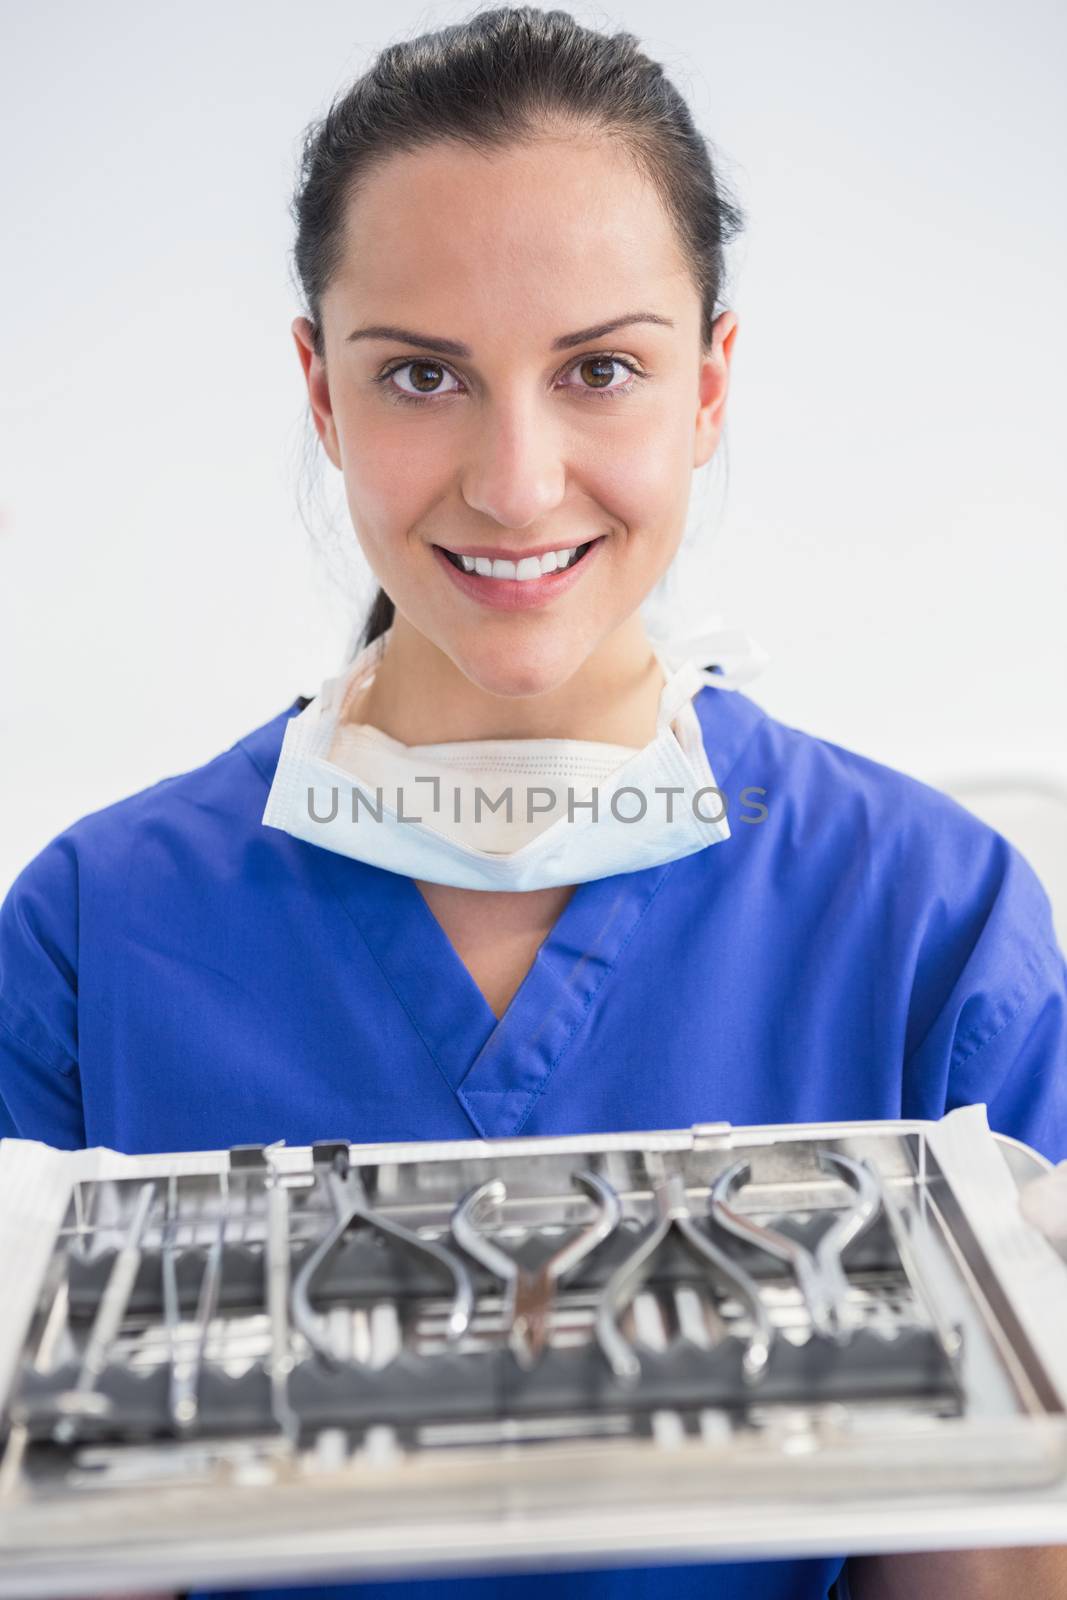 Smiling dentist holding tray with equipment in dental clinic